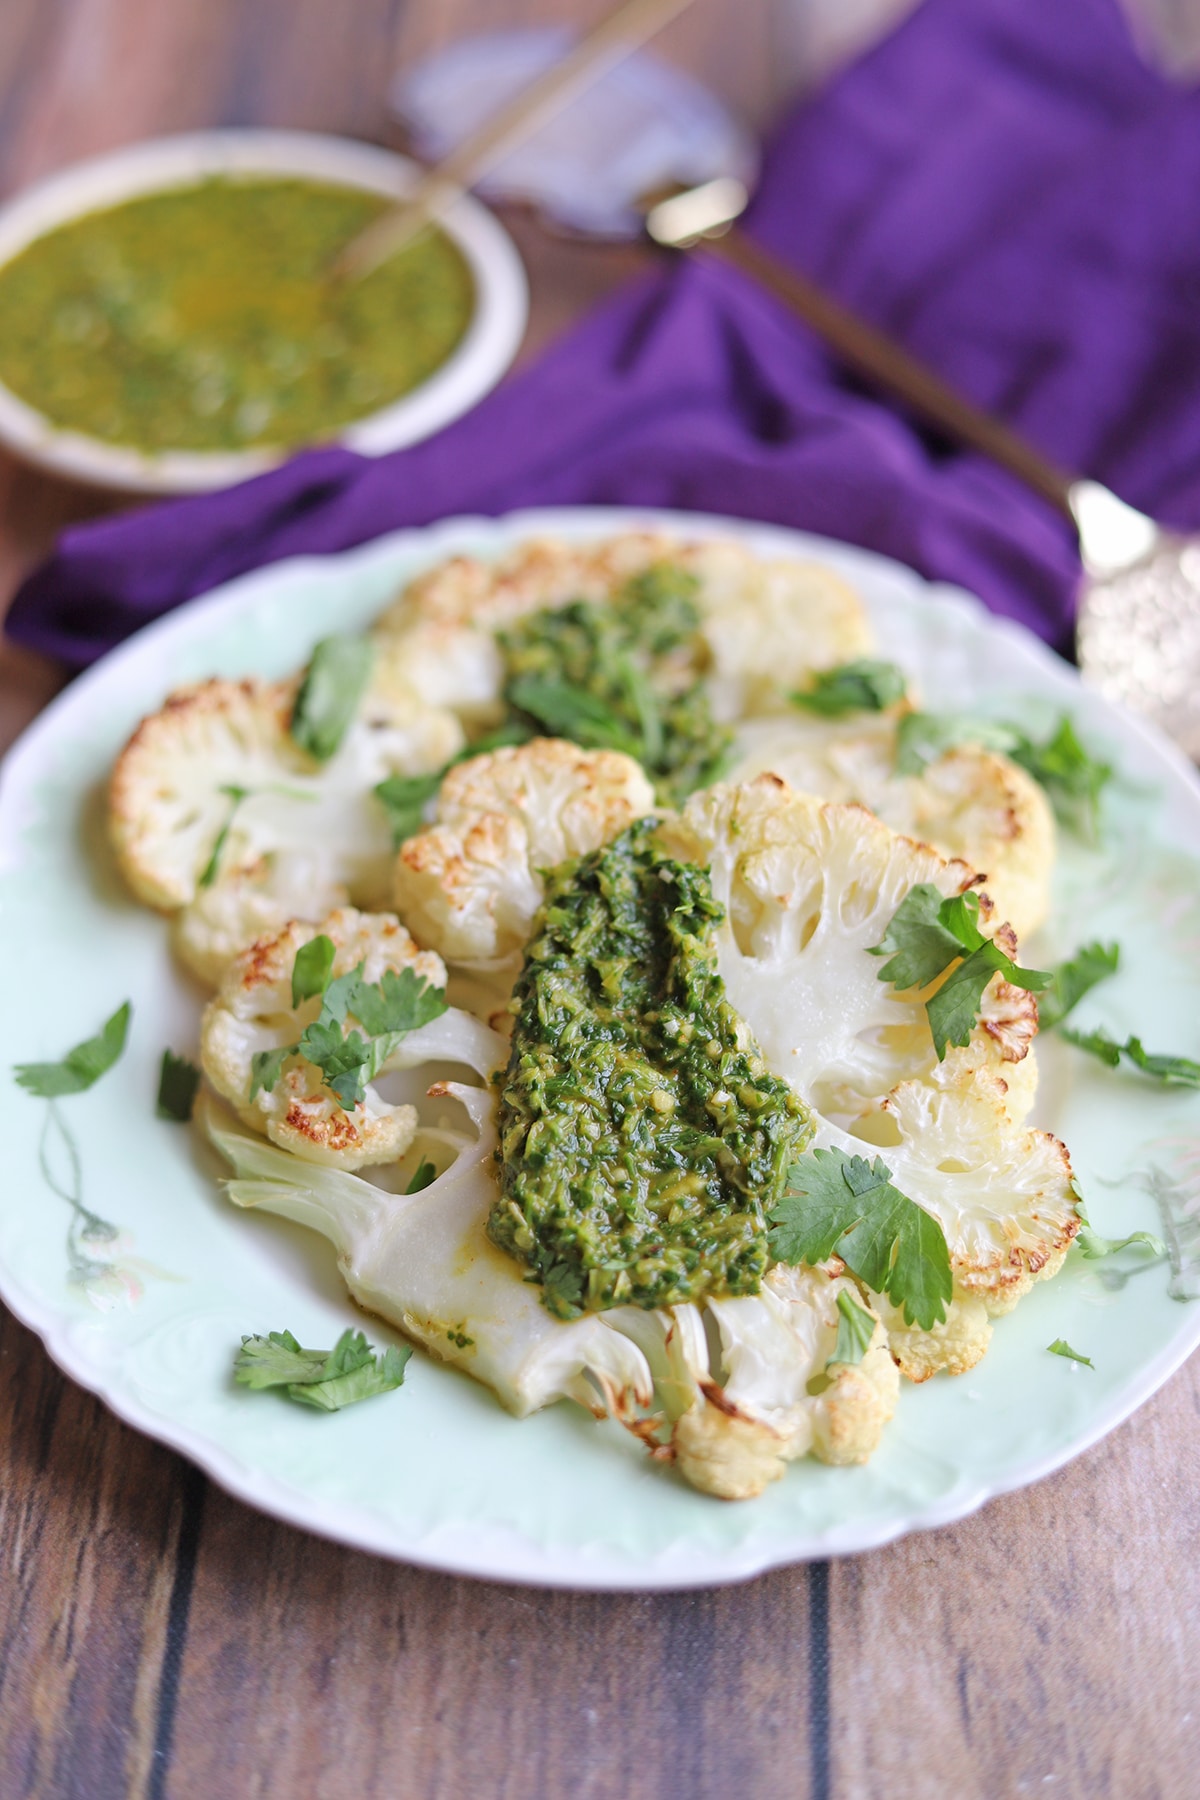 Two cauliflower steaks on plate with cilantro chimicurri.